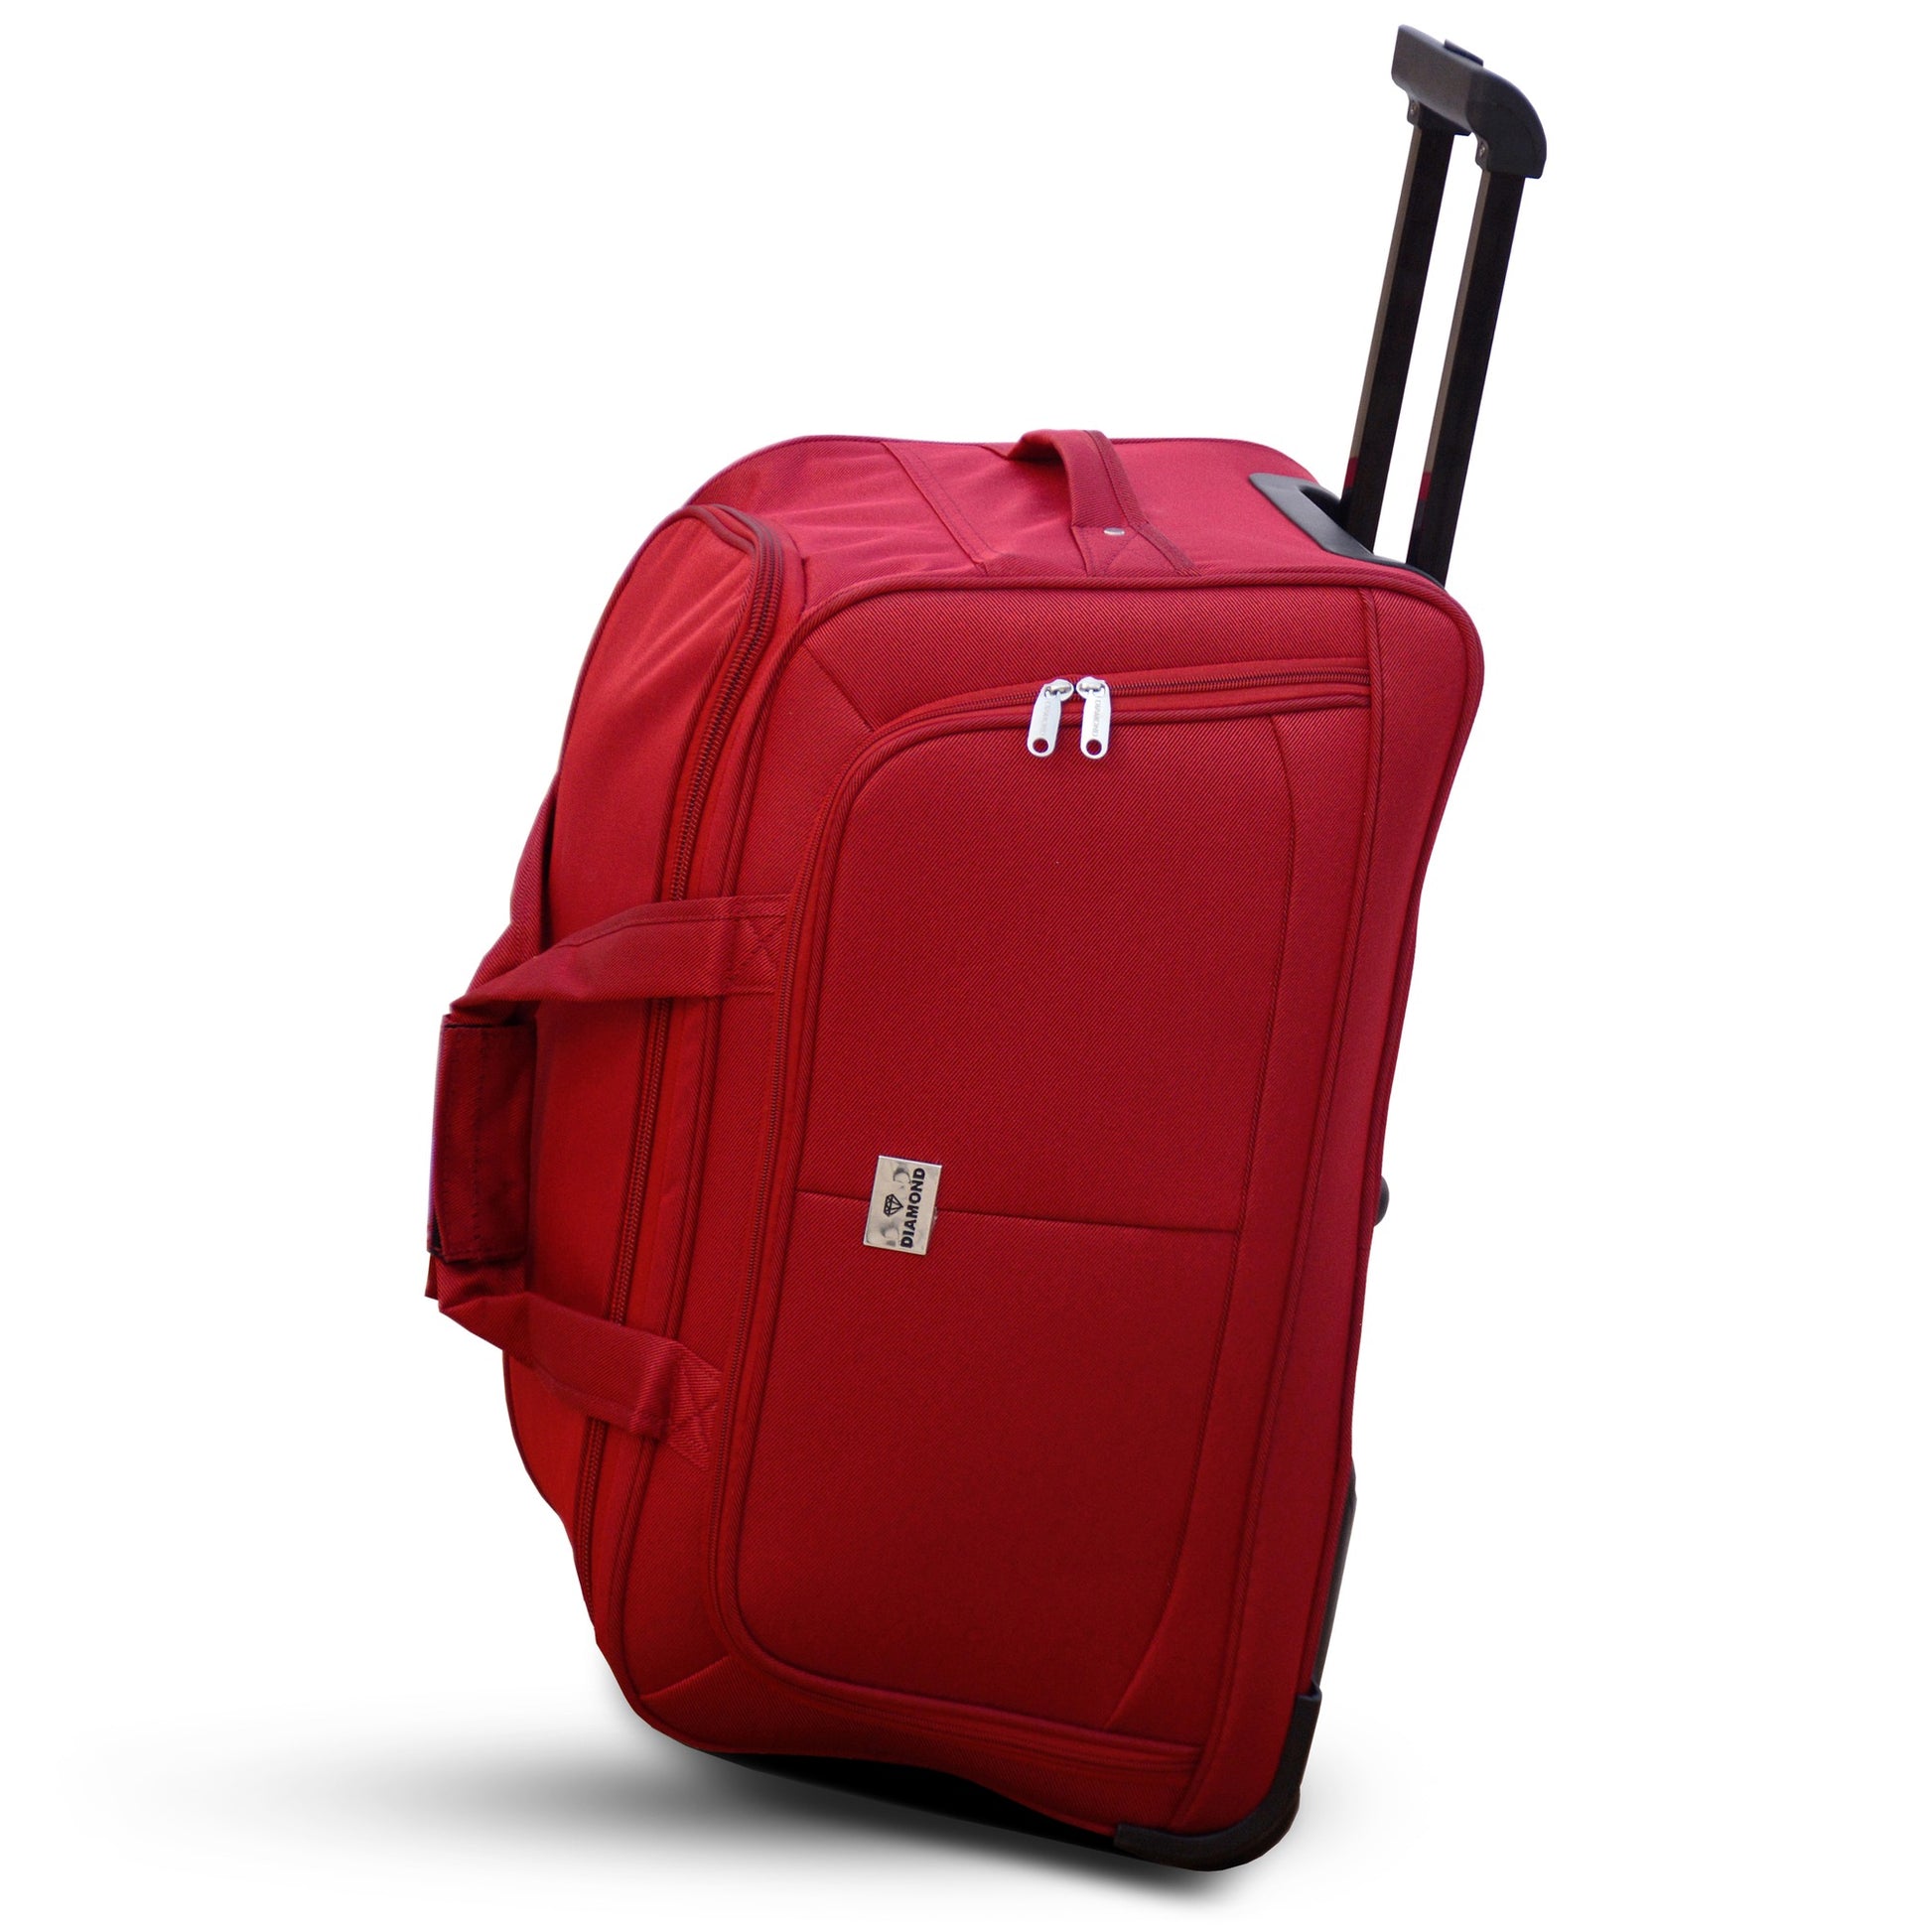 Wheeled Red Material Duffel Bag | Carry on Travel bag With Wheel - 0050 Zaappy